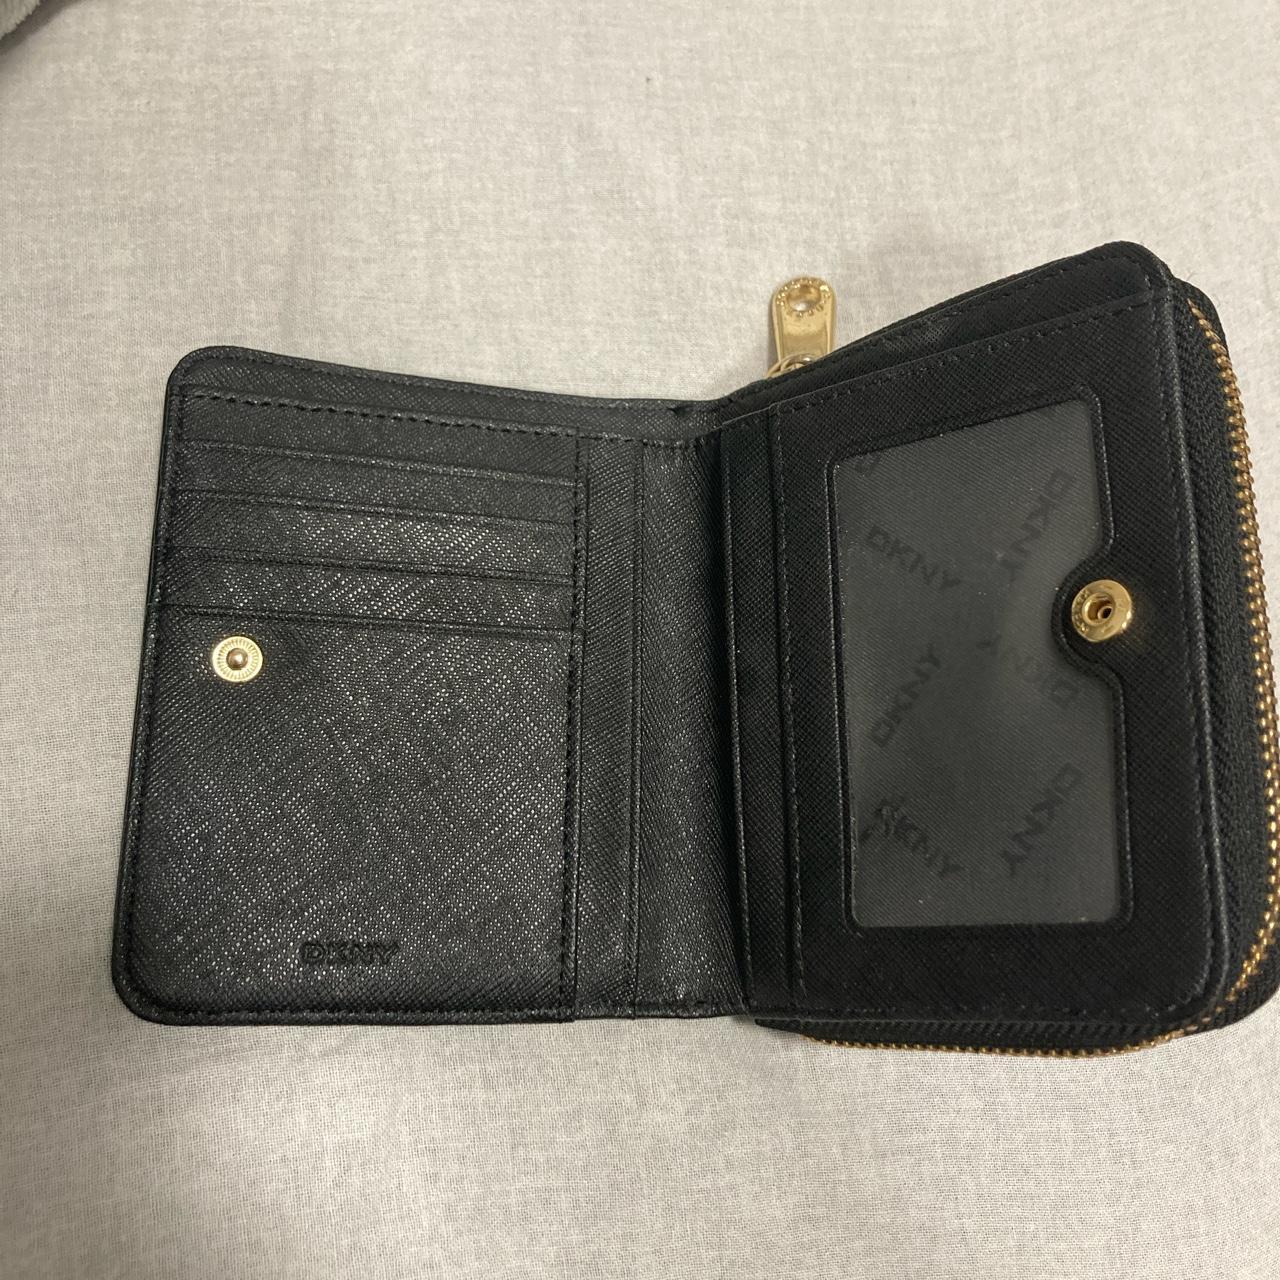 DKNY BLACK COIN PURSE/ CARD HOLDER WITH GOLD ZIP AND... - Depop